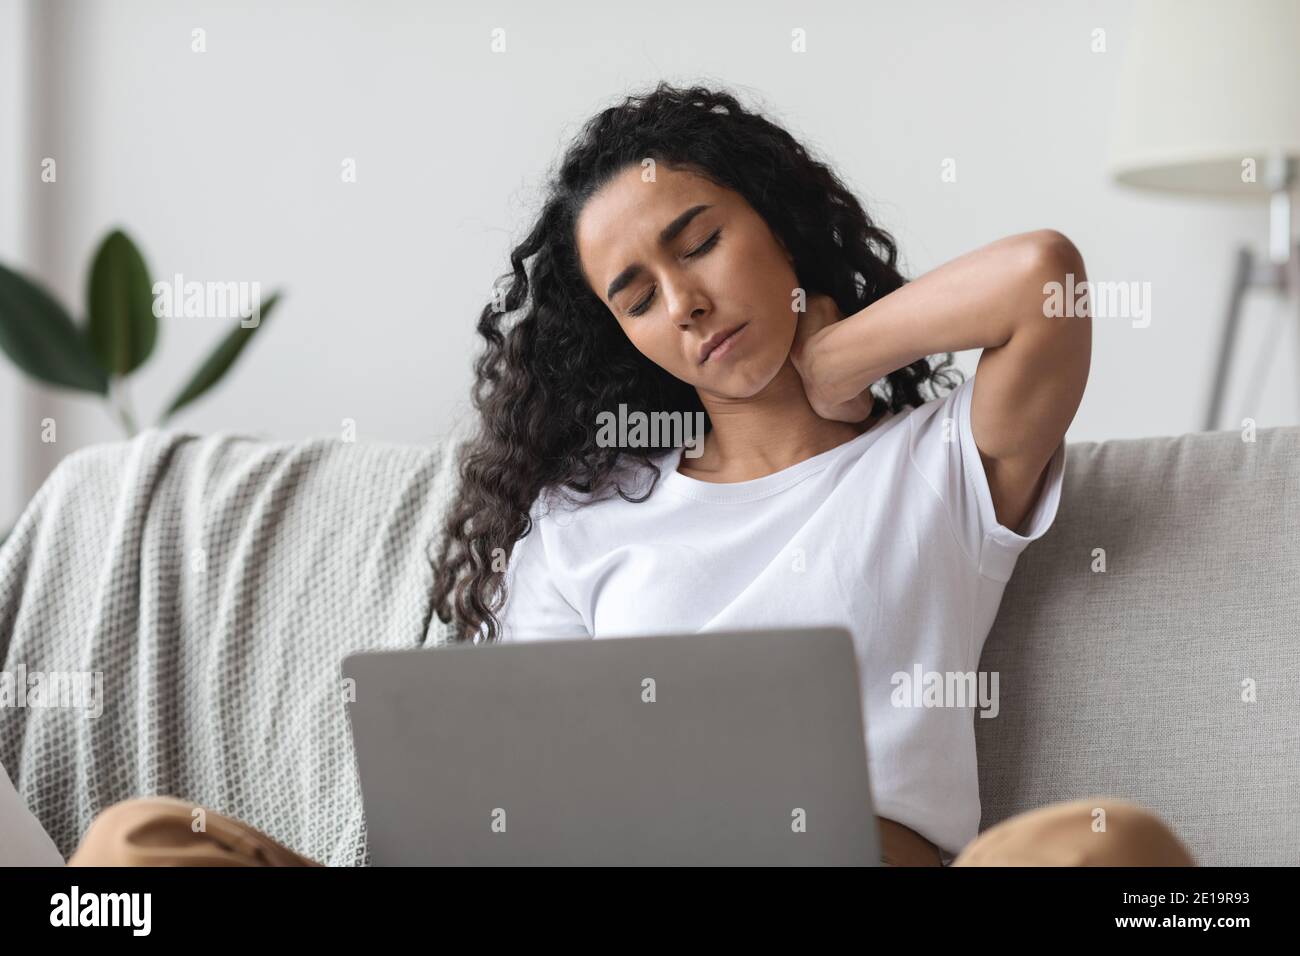 Brunette woman having pain in neck while working with laptop Stock Photo